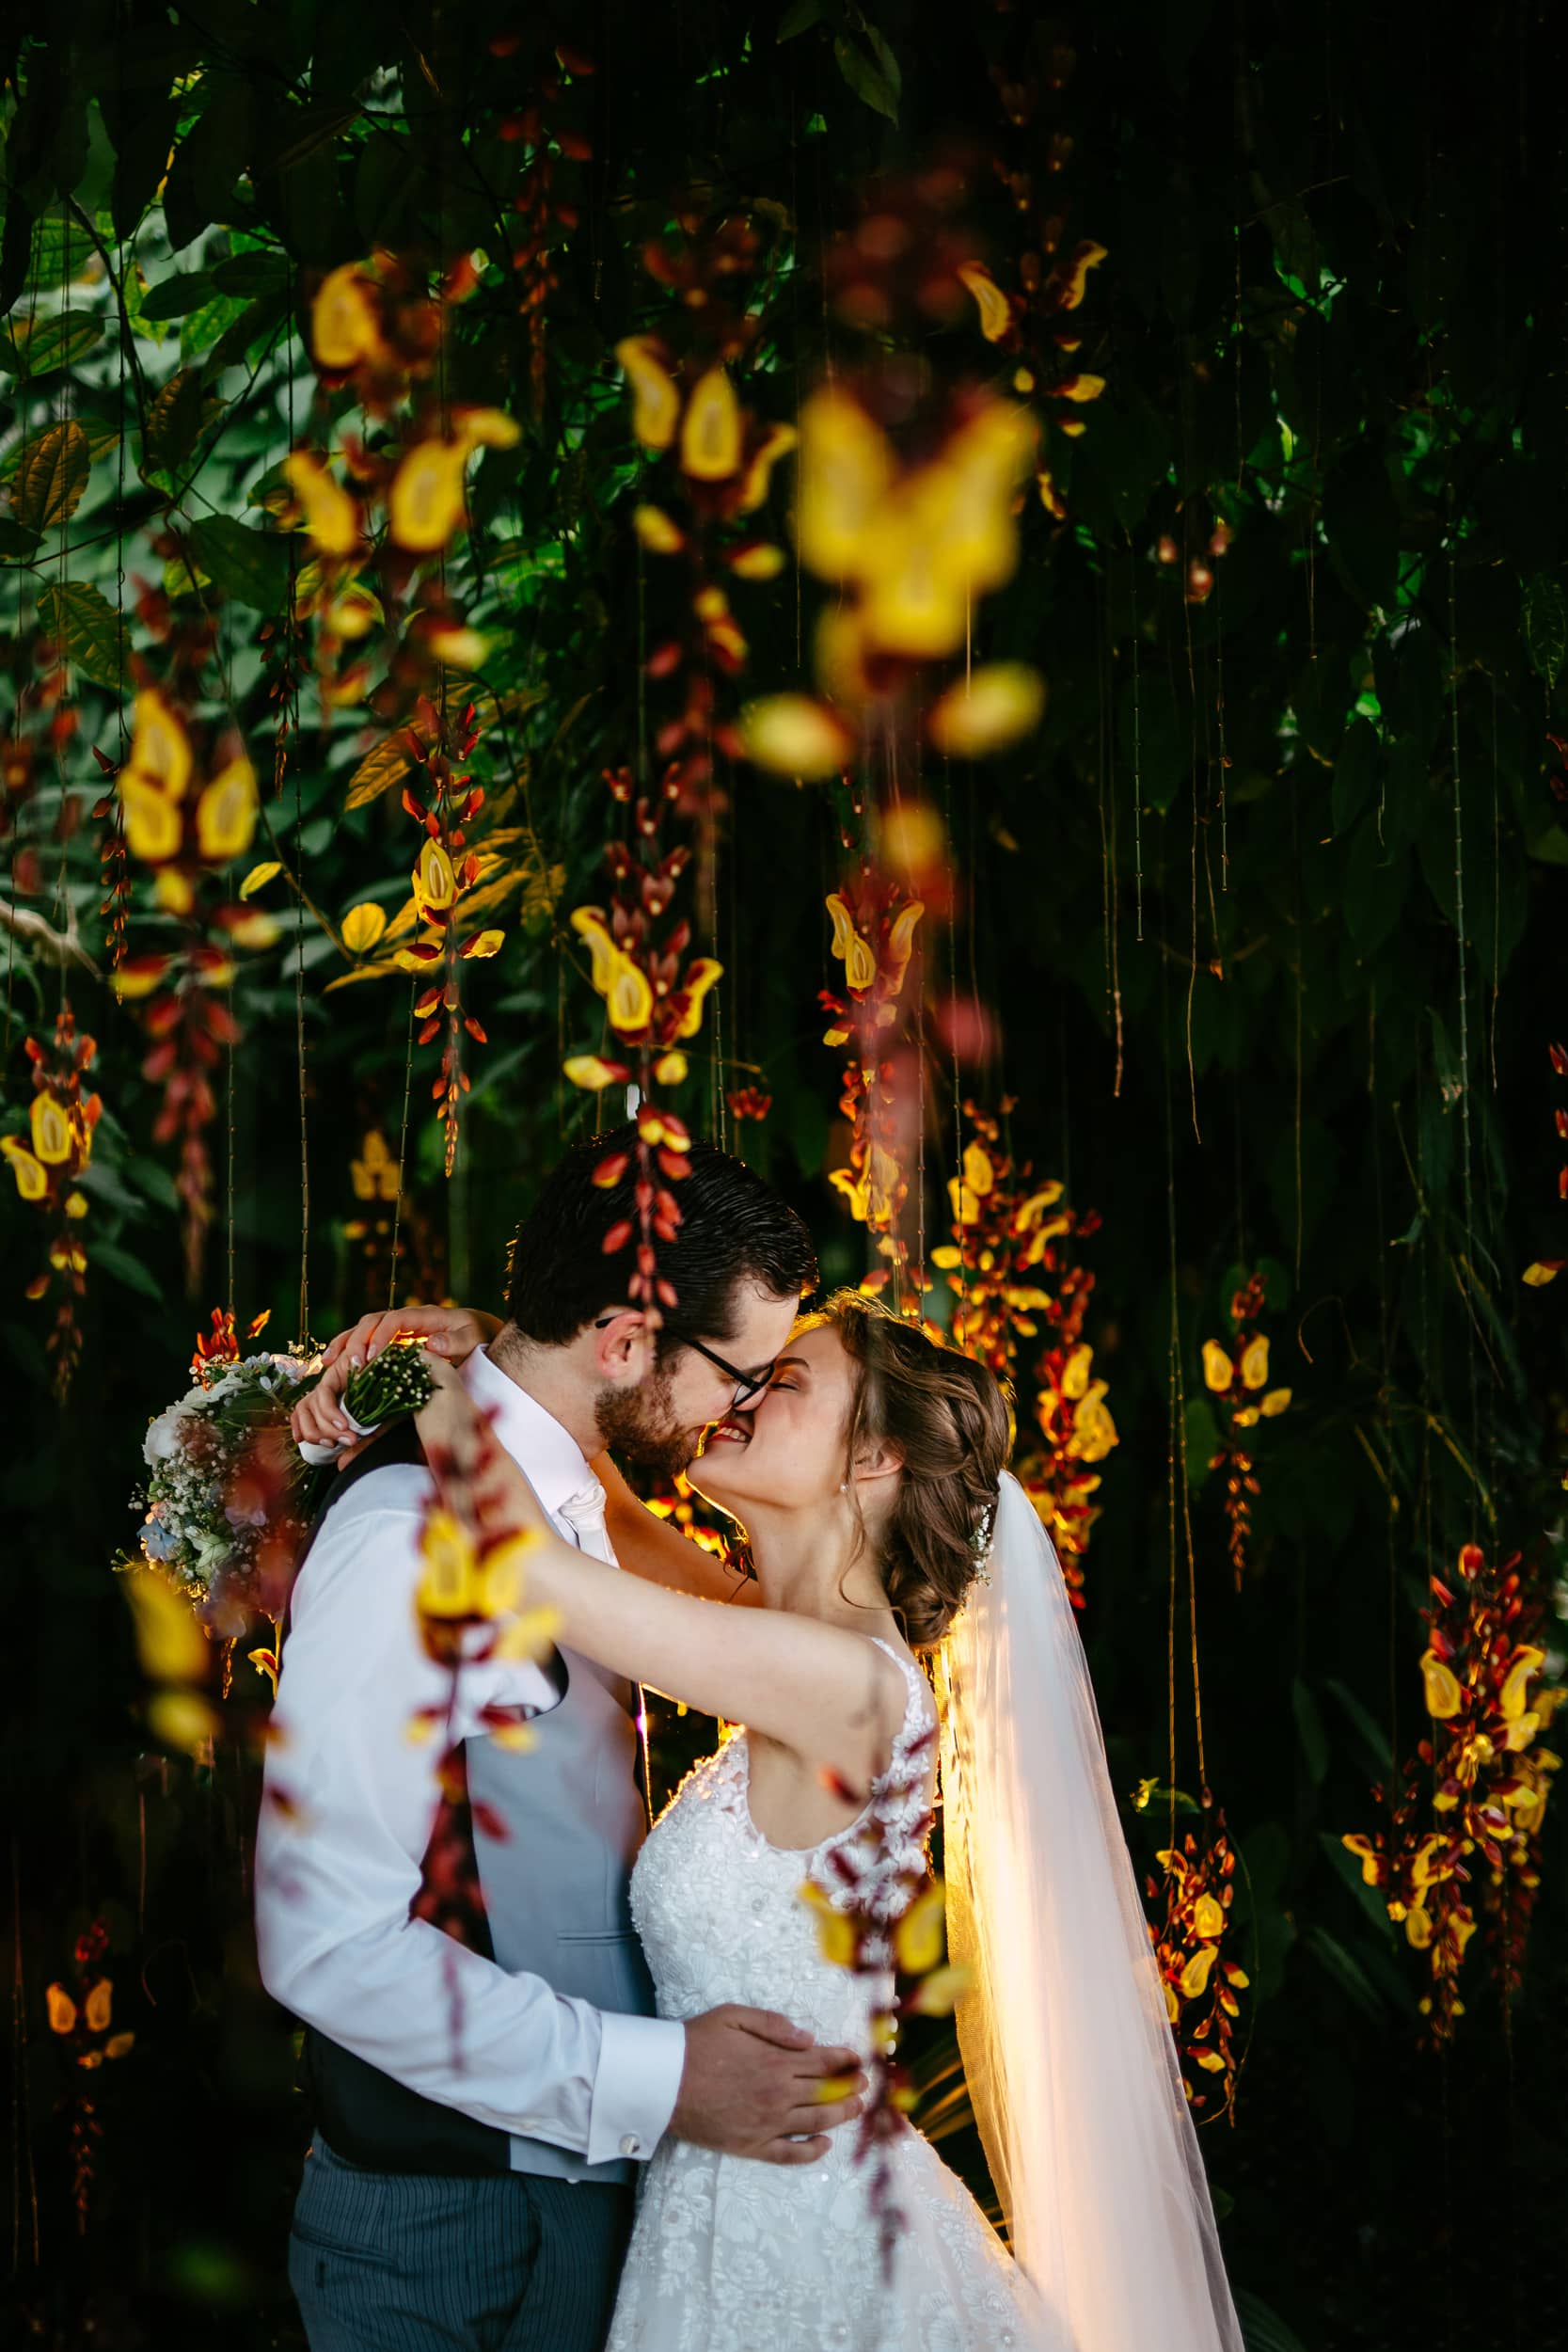 On their wedding day, a bride and groom kiss under a beautiful floral arch.